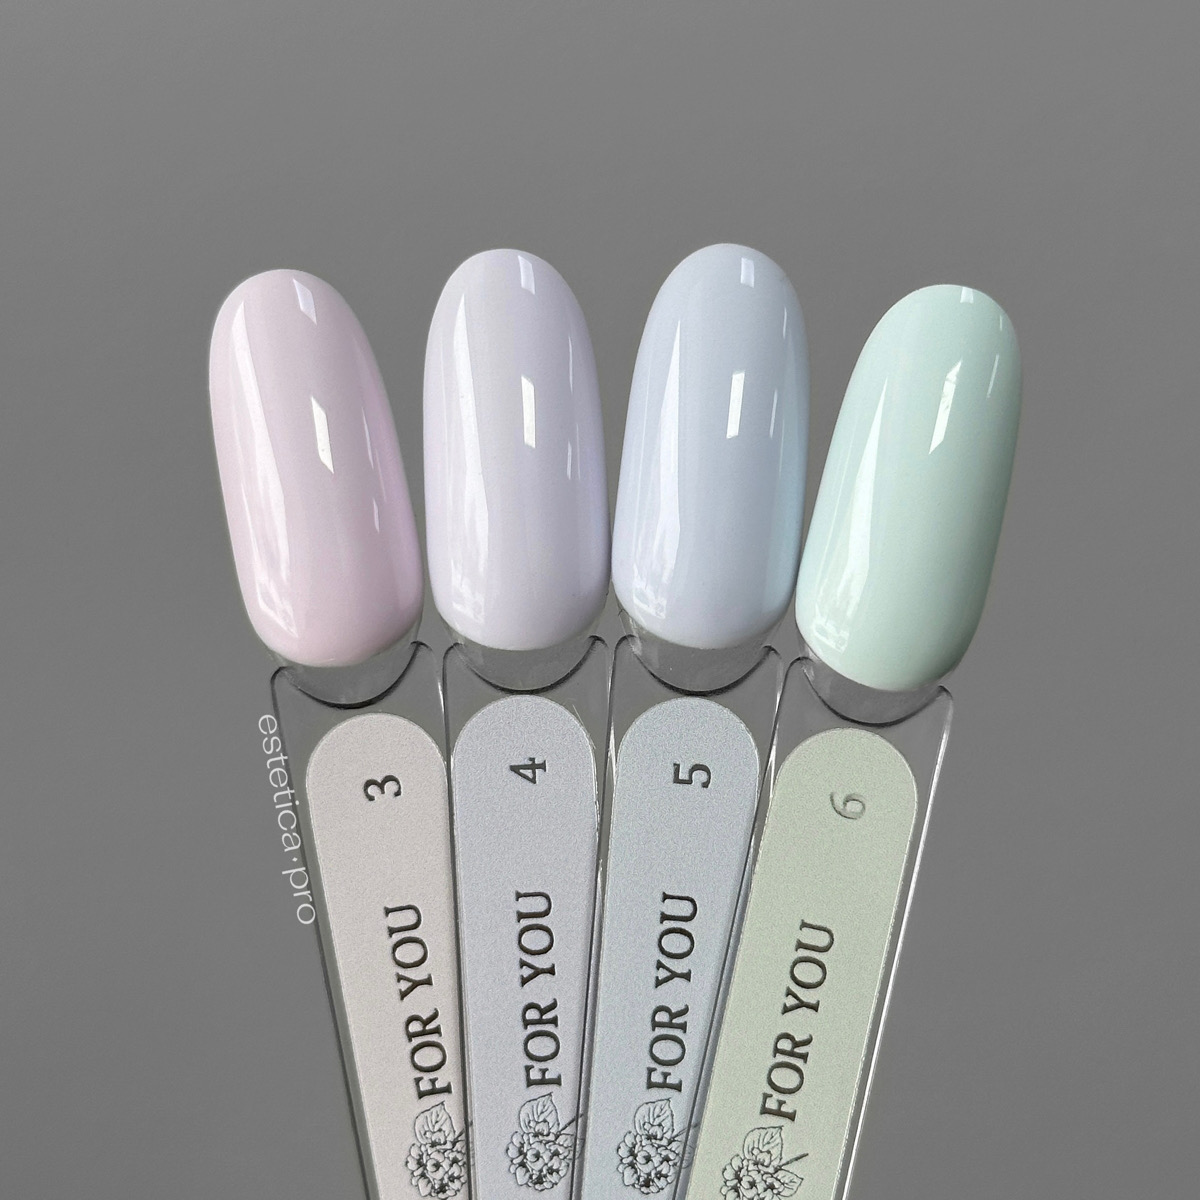 Гель-лак Iva Nails For You 06, 8 мл.